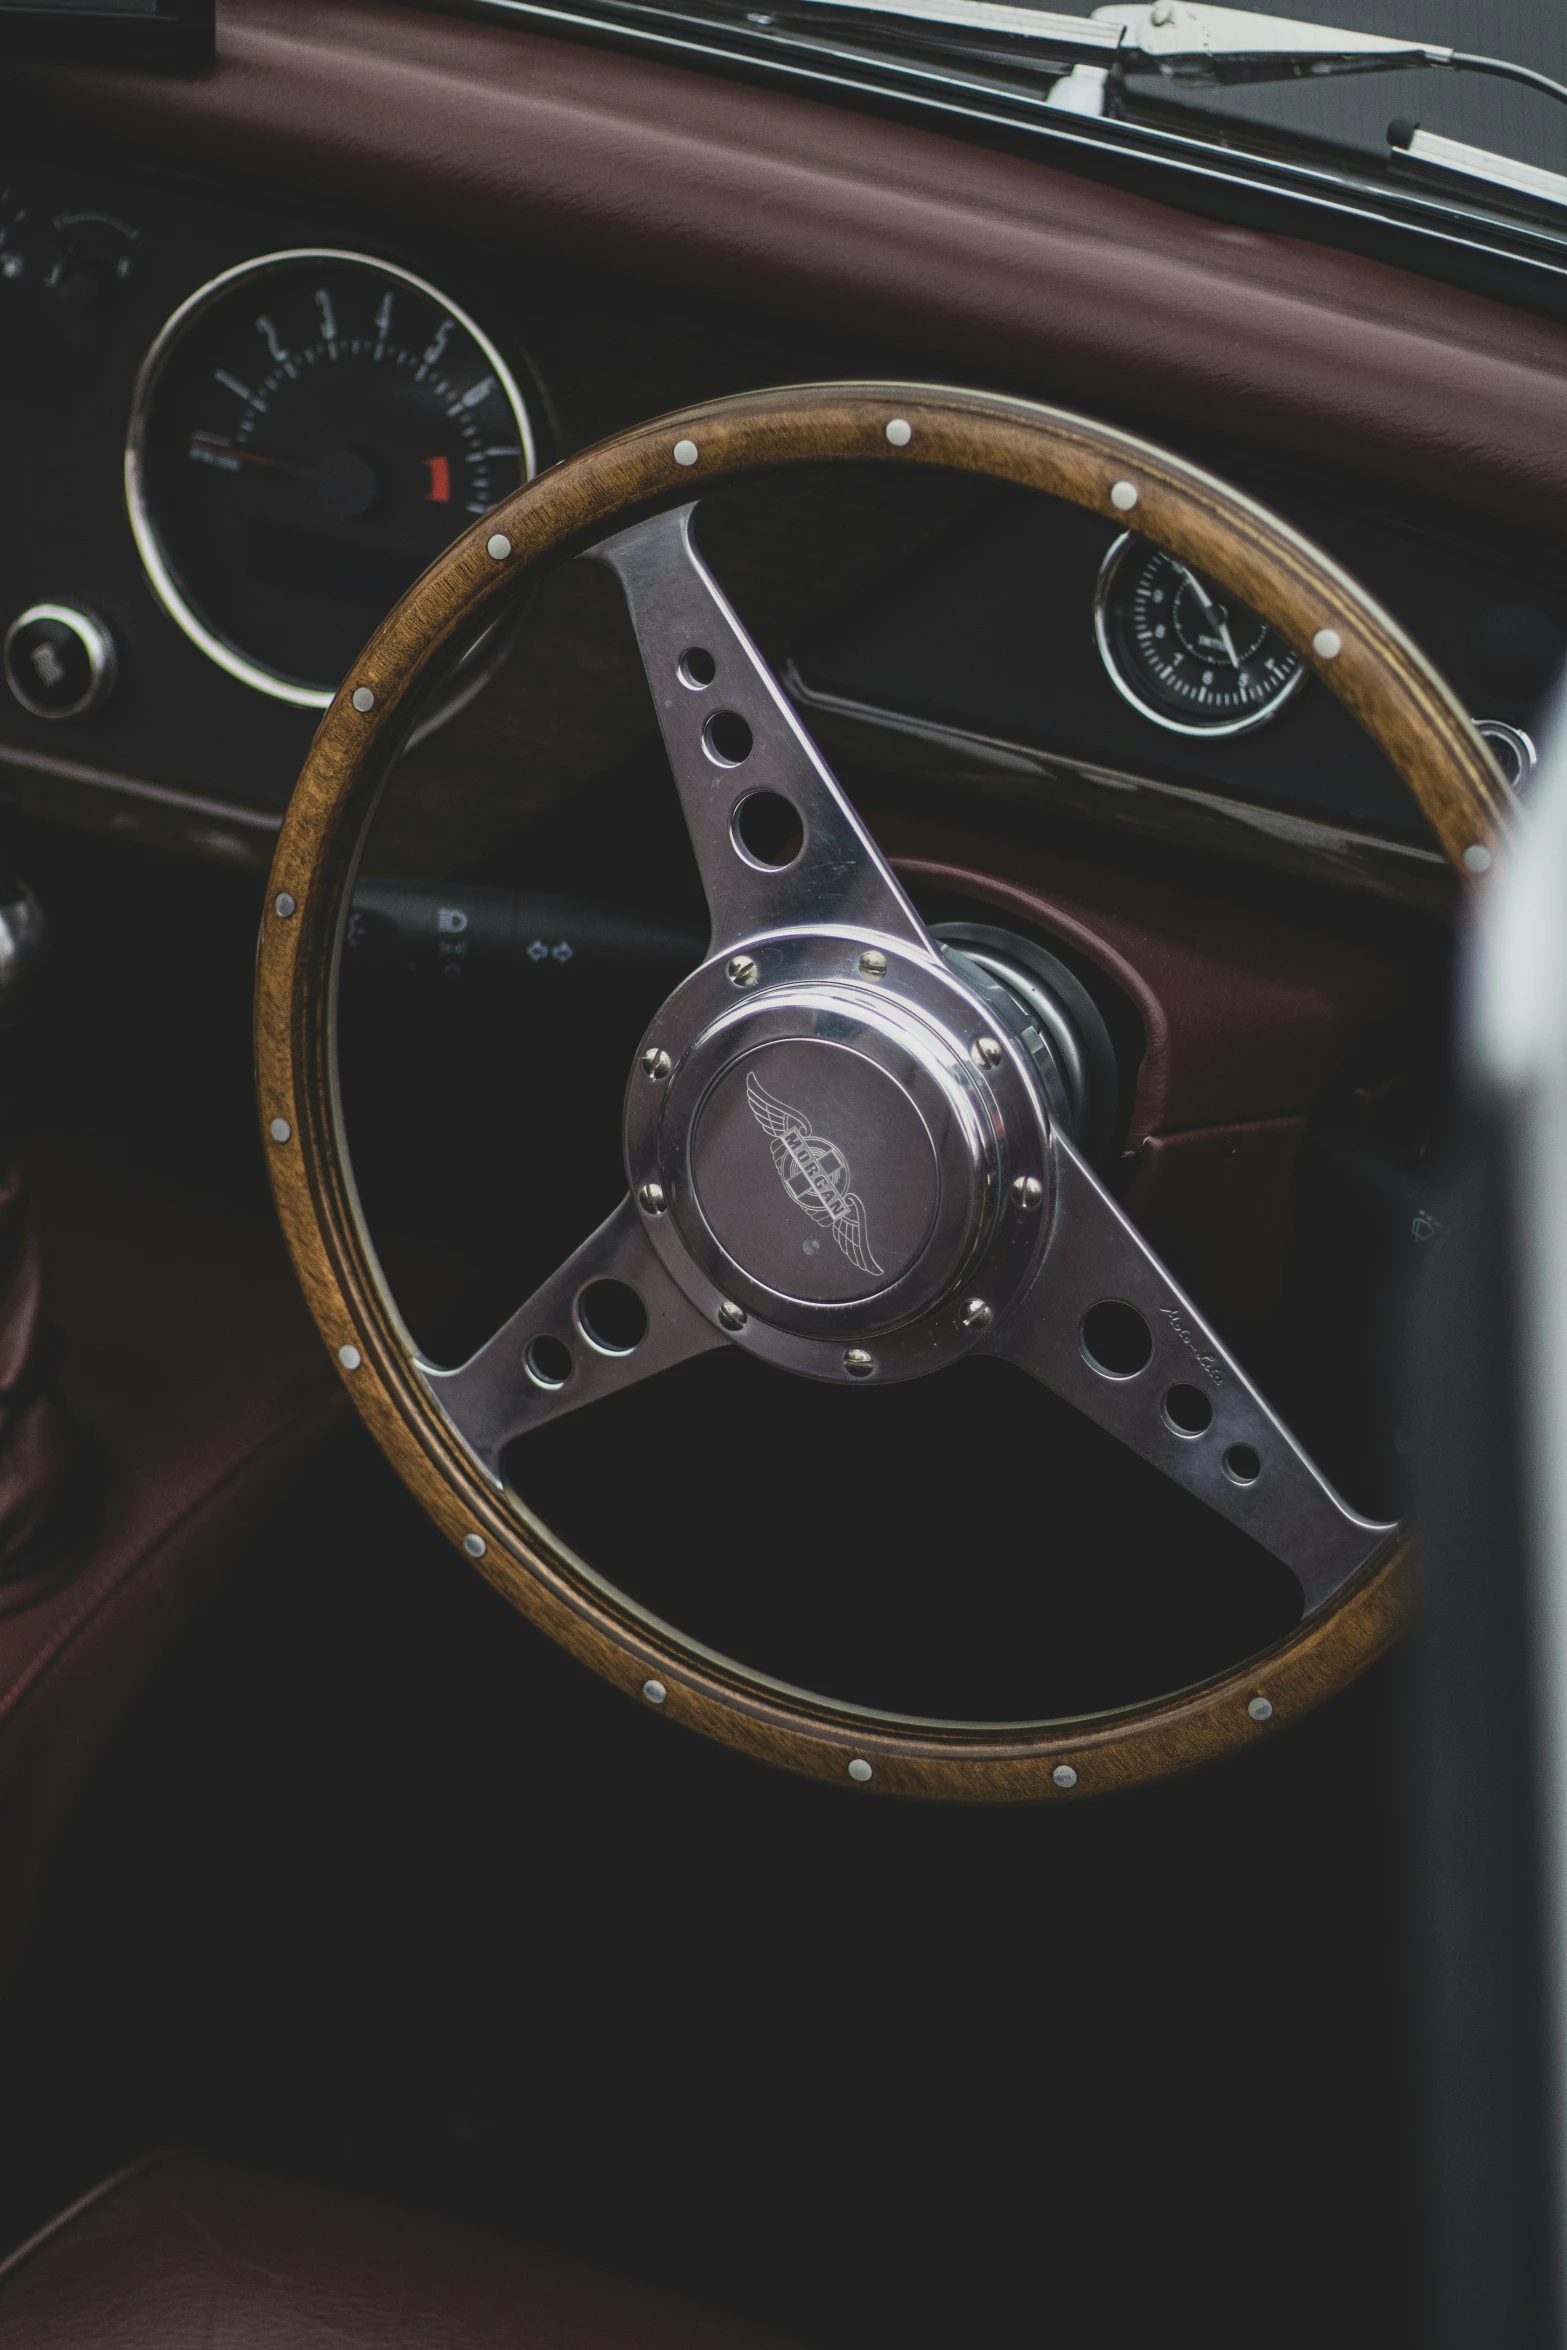 the dashboard and dashboard wheel of an old car